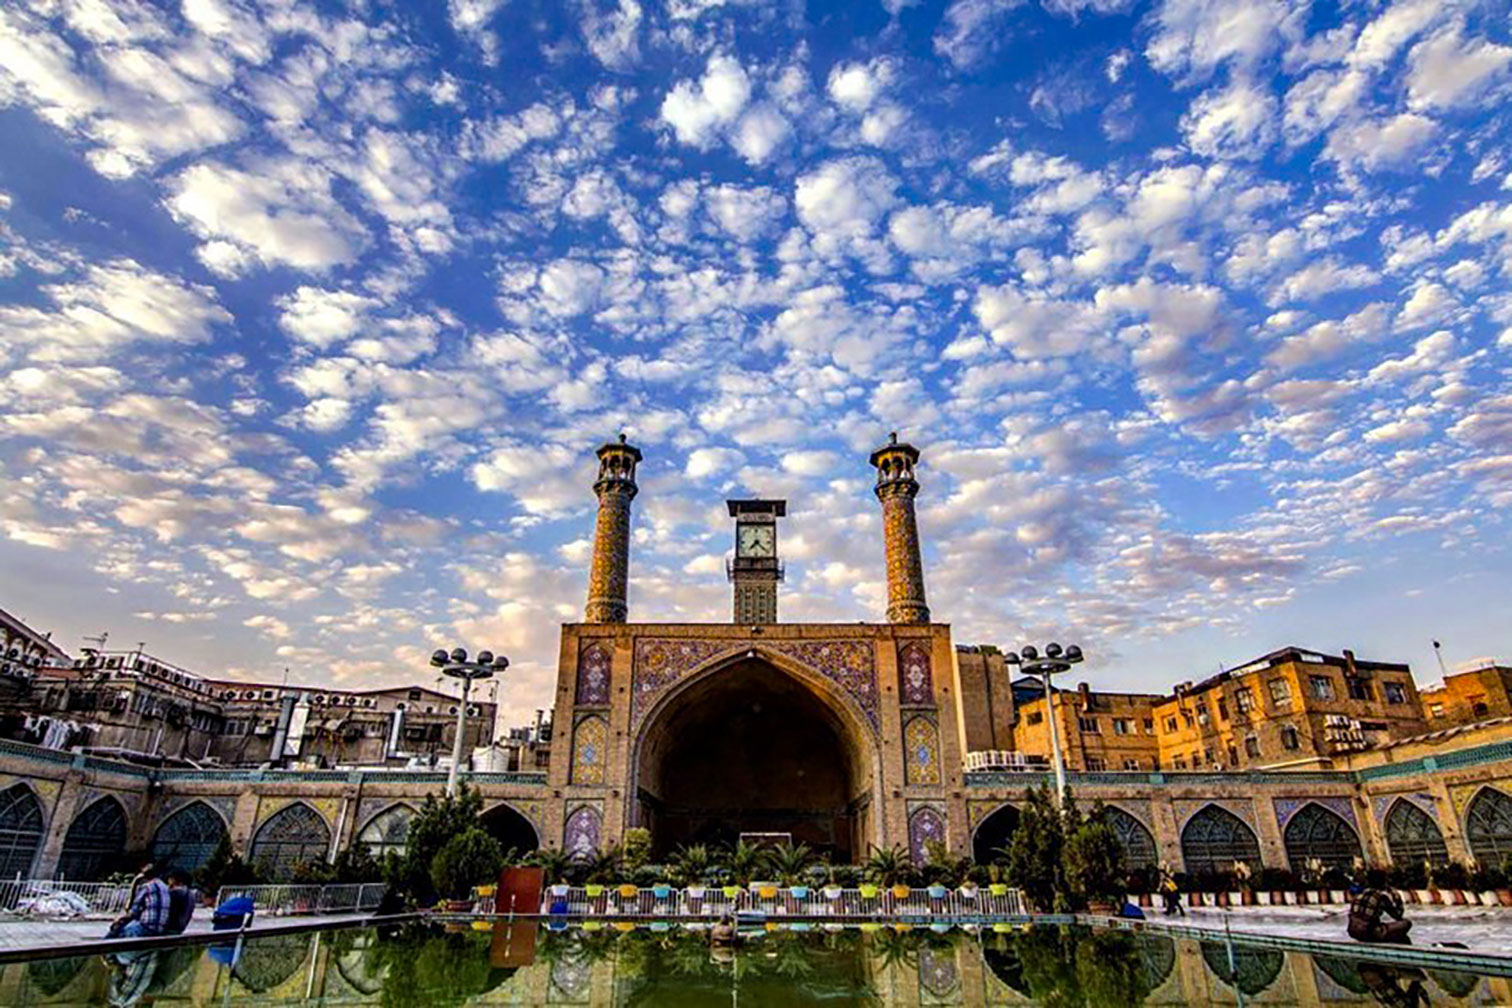 Imam Mosque - The history of bazaars in Iran